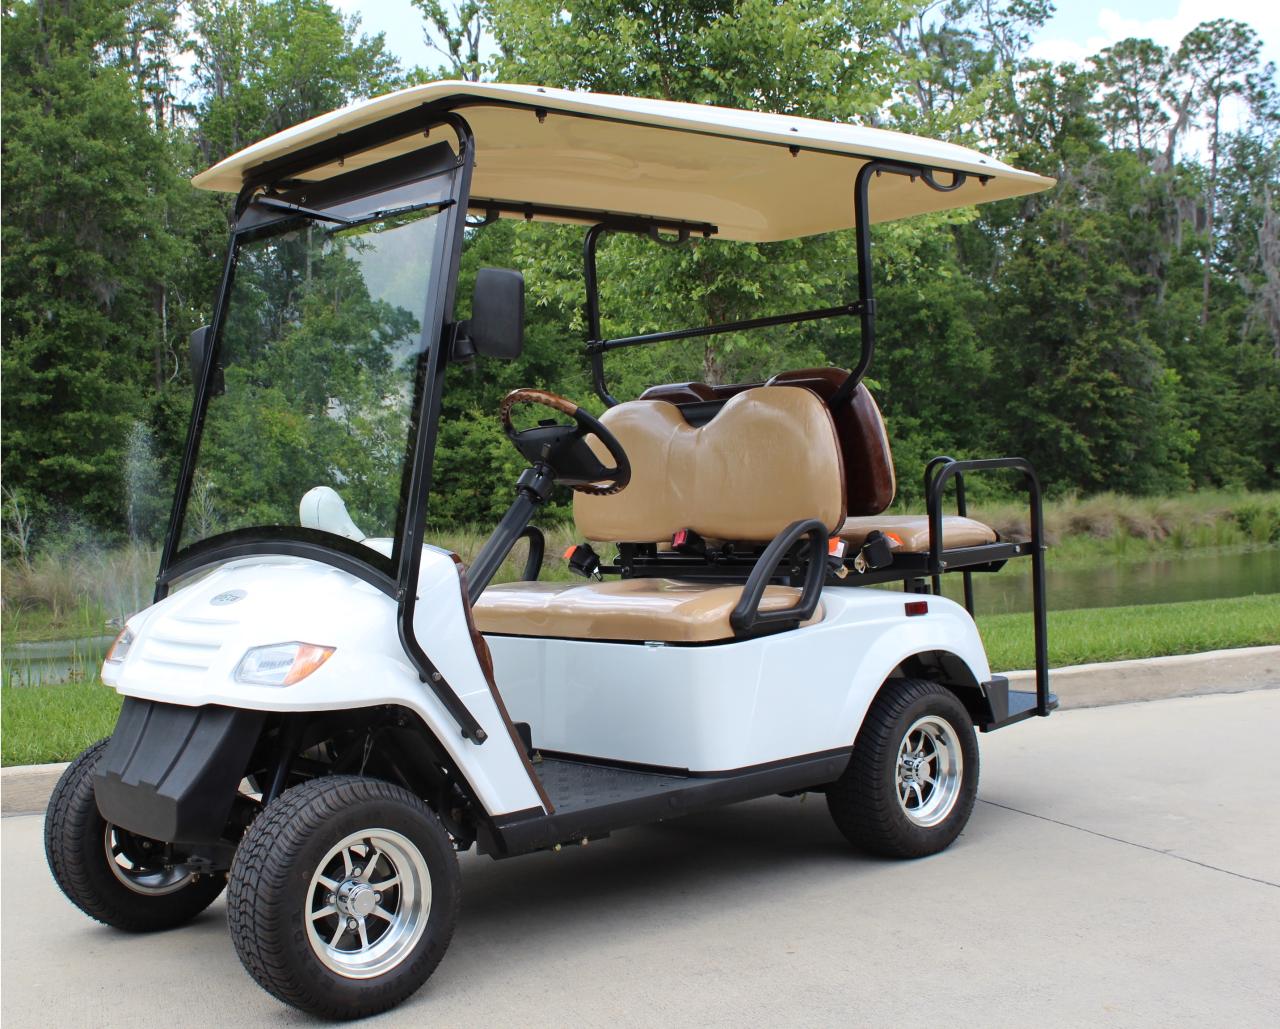 Find Your Dream Golf Cart: Used Golf Carts for Sale by Owner in Dewey, Oklahoma